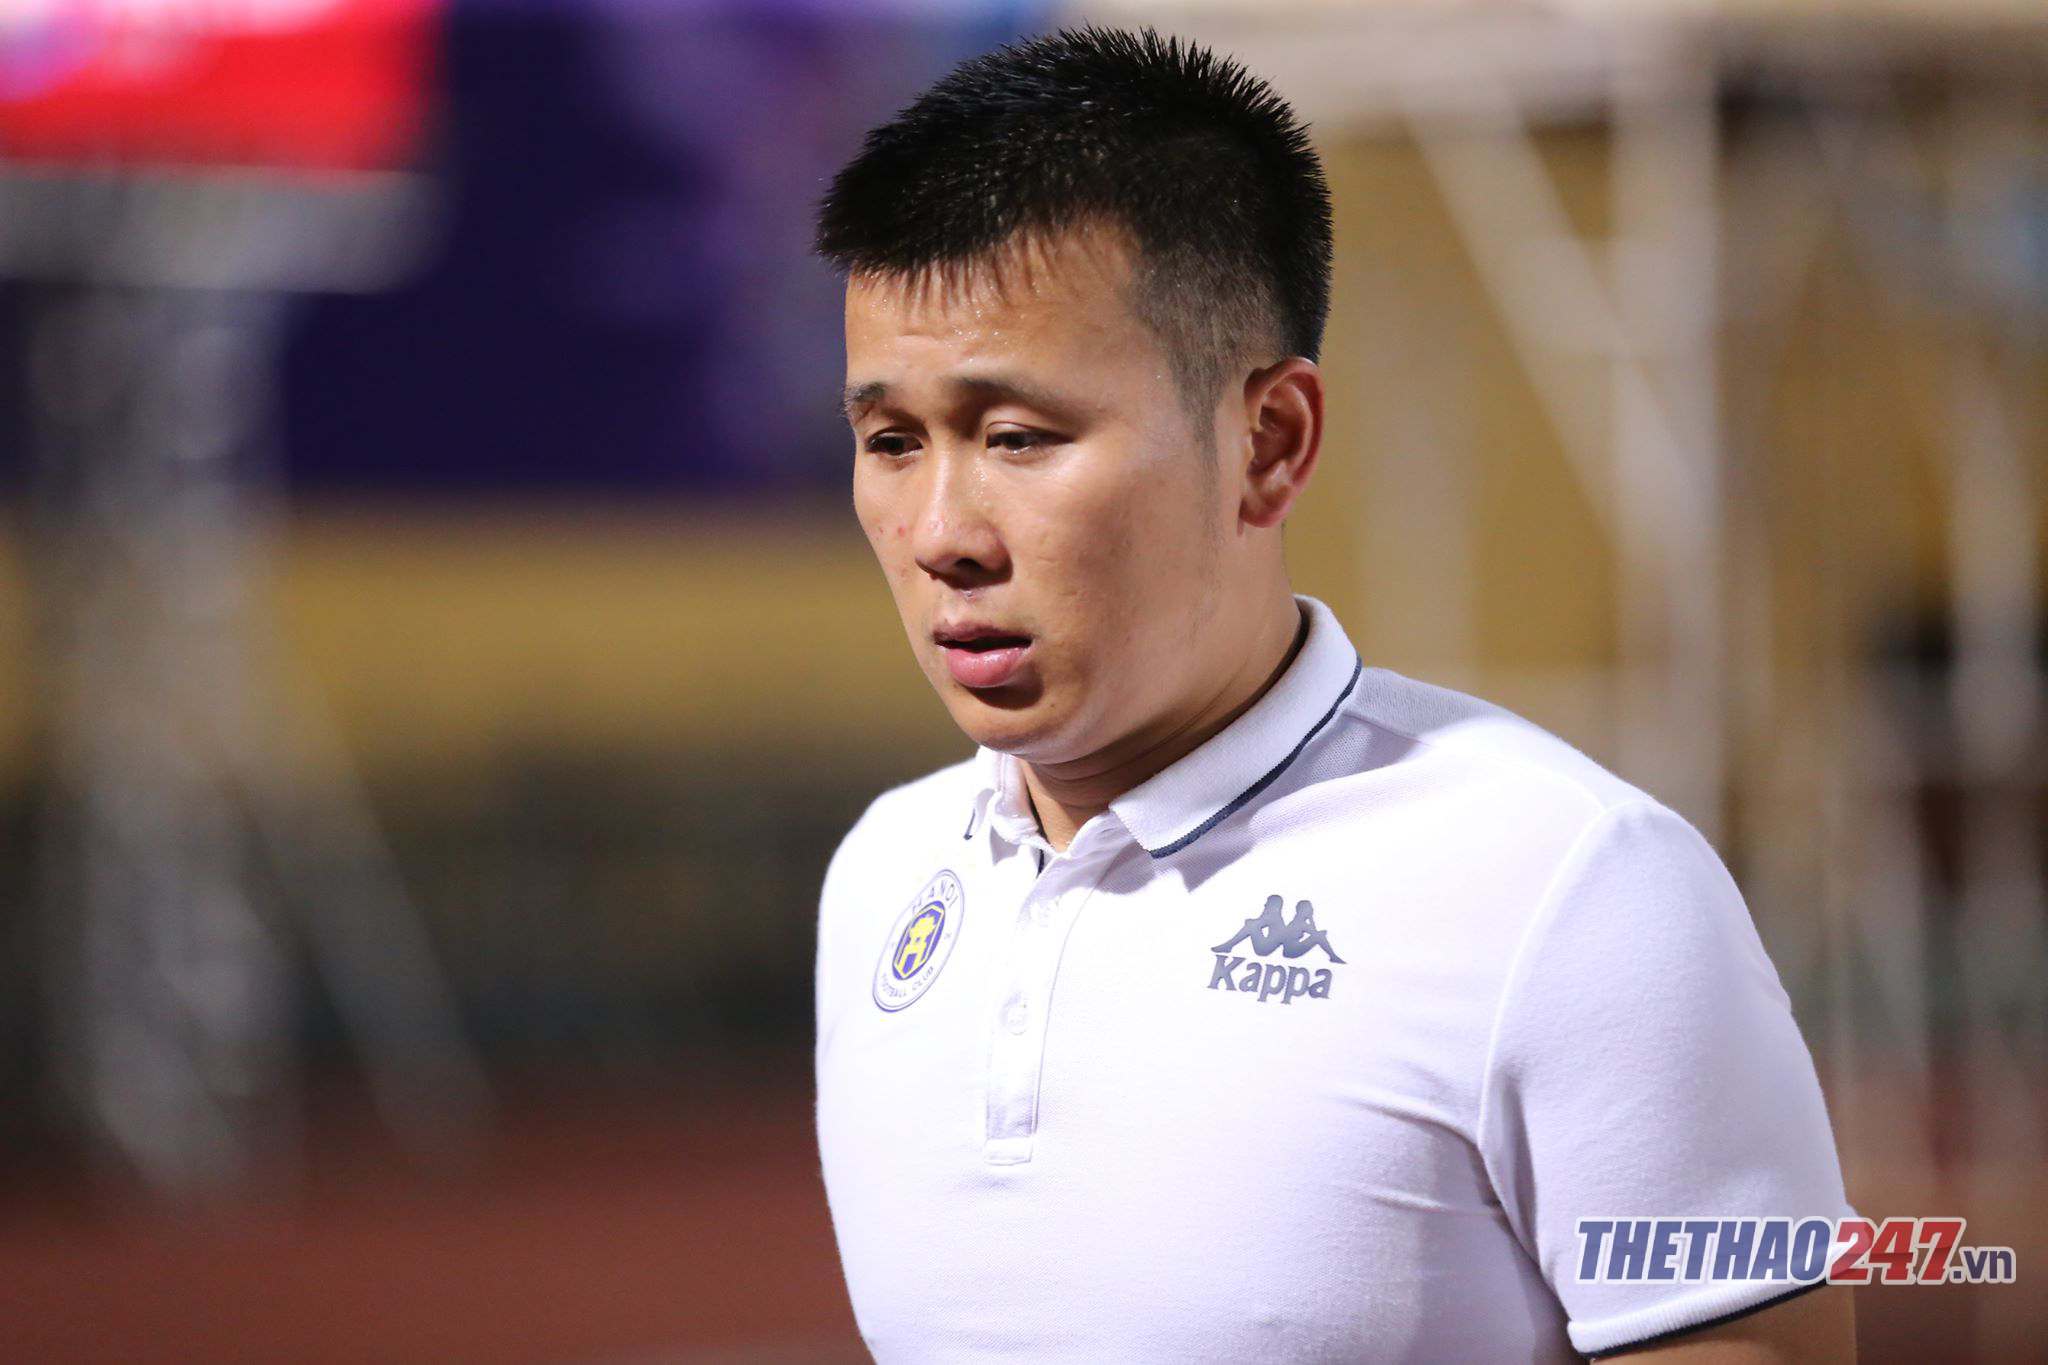 Goalie Van Cong’s injury will be a problem for Hanoi FC’s defense